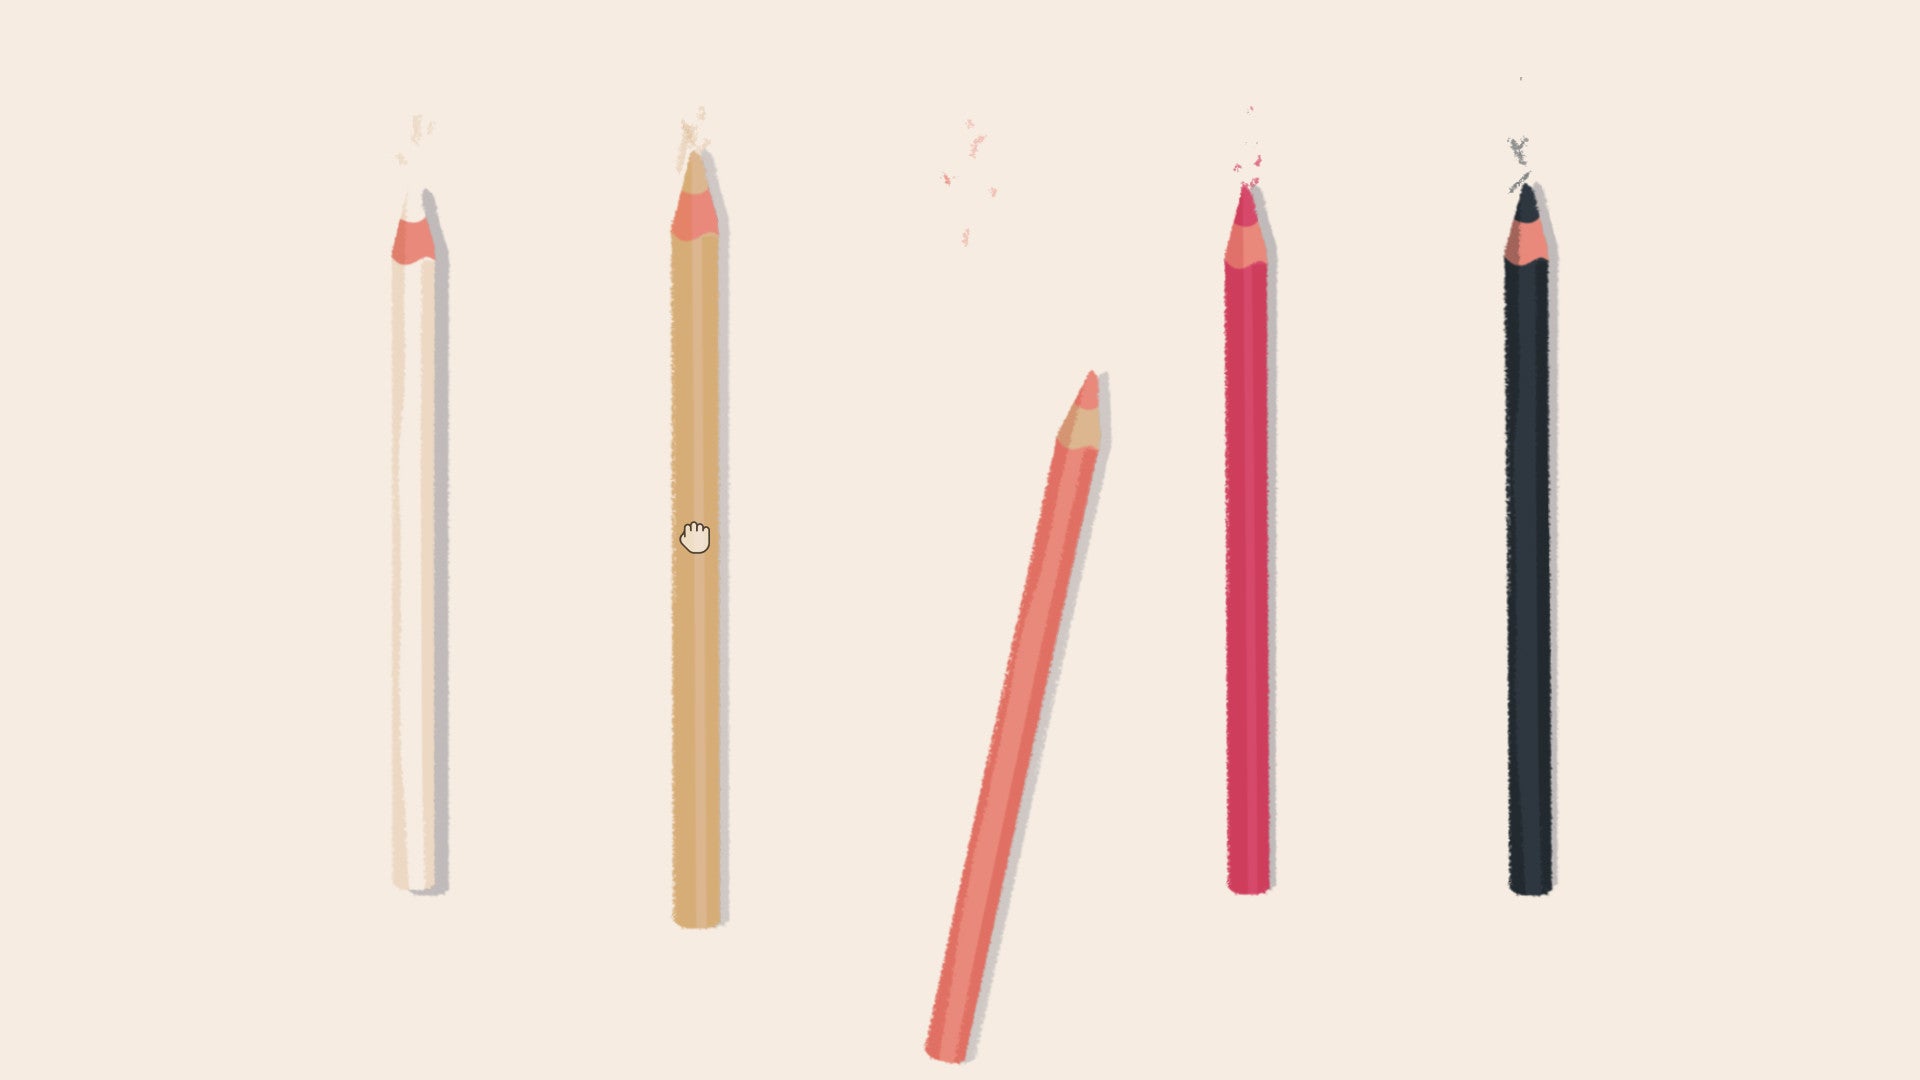 A set of pencils, with one slightly askew, in A Little To The Left